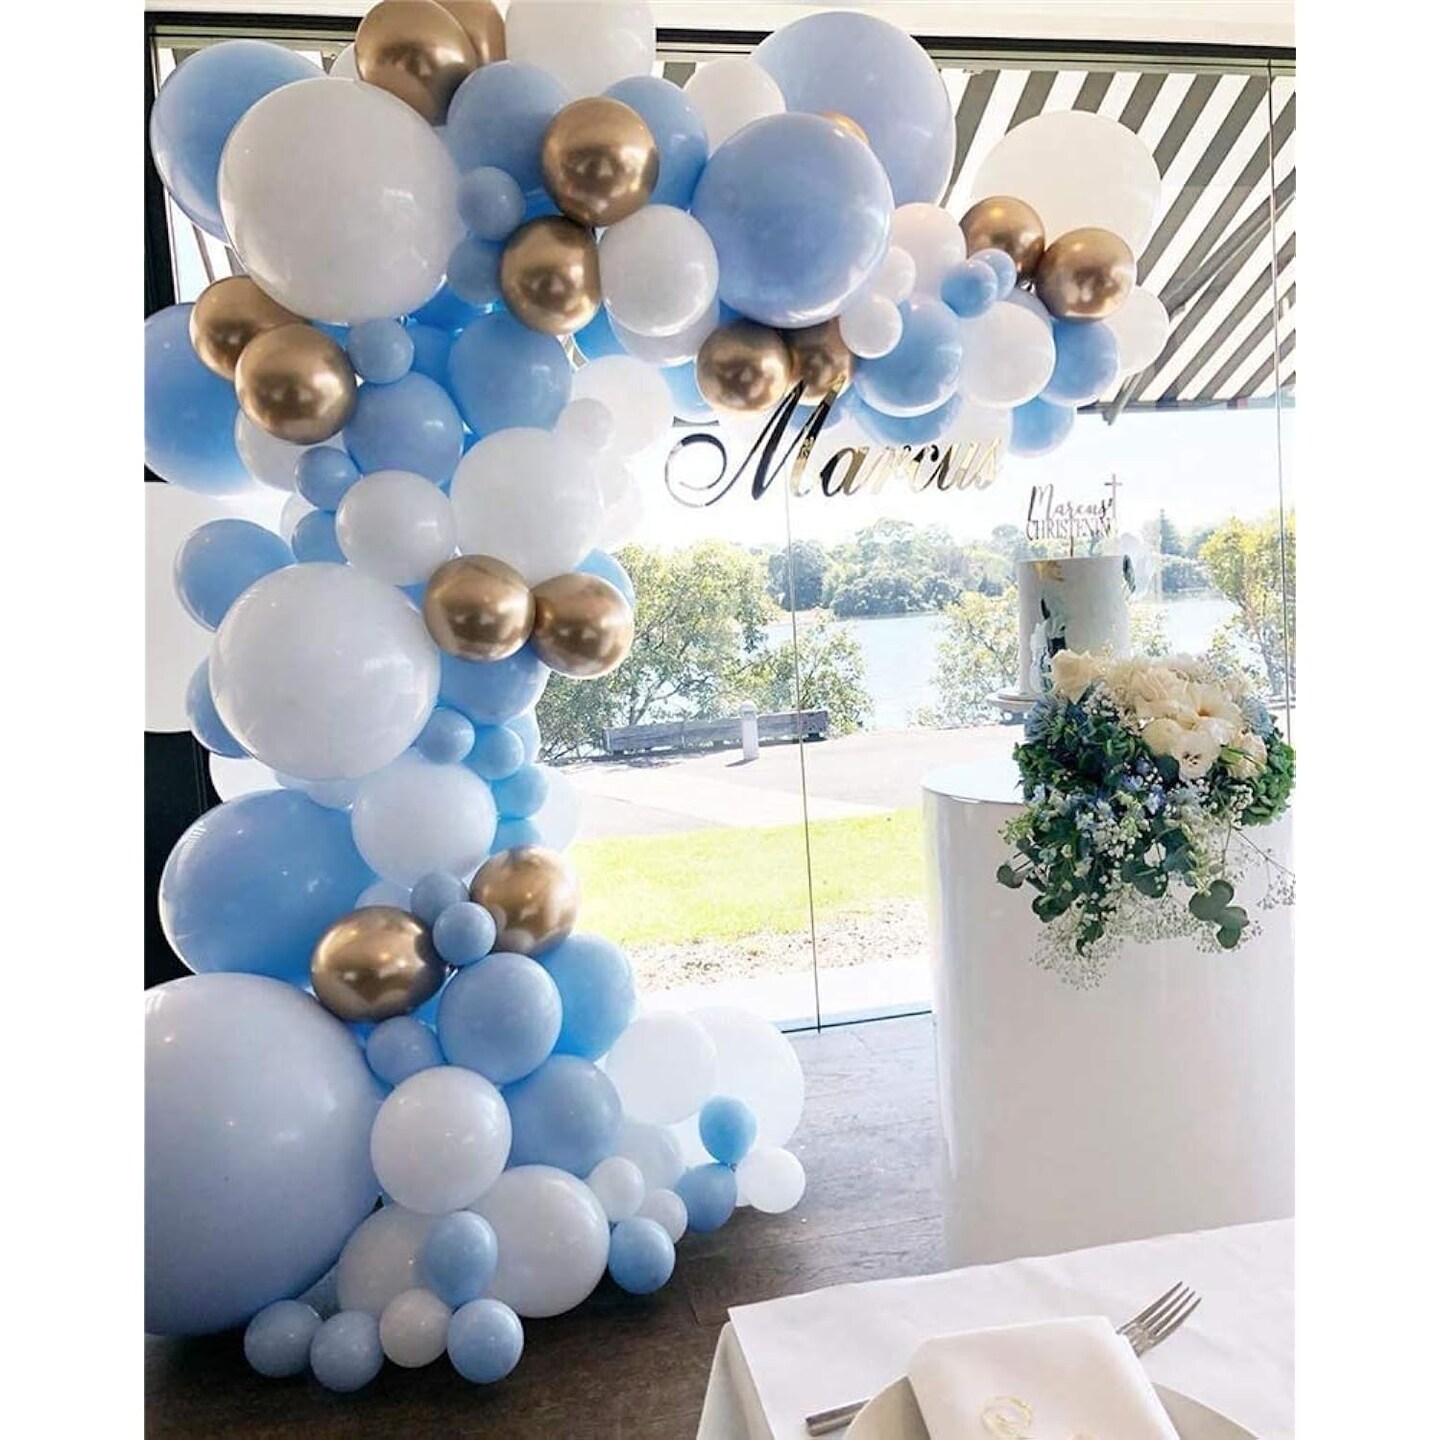 Blue White Gold Balloon Garland Arch Kit Metallic Chrome God Ballons with Macaroon Blue White Latex Balloons for Birthday Wedding Bridal Shower Party Baby Shower Decoration